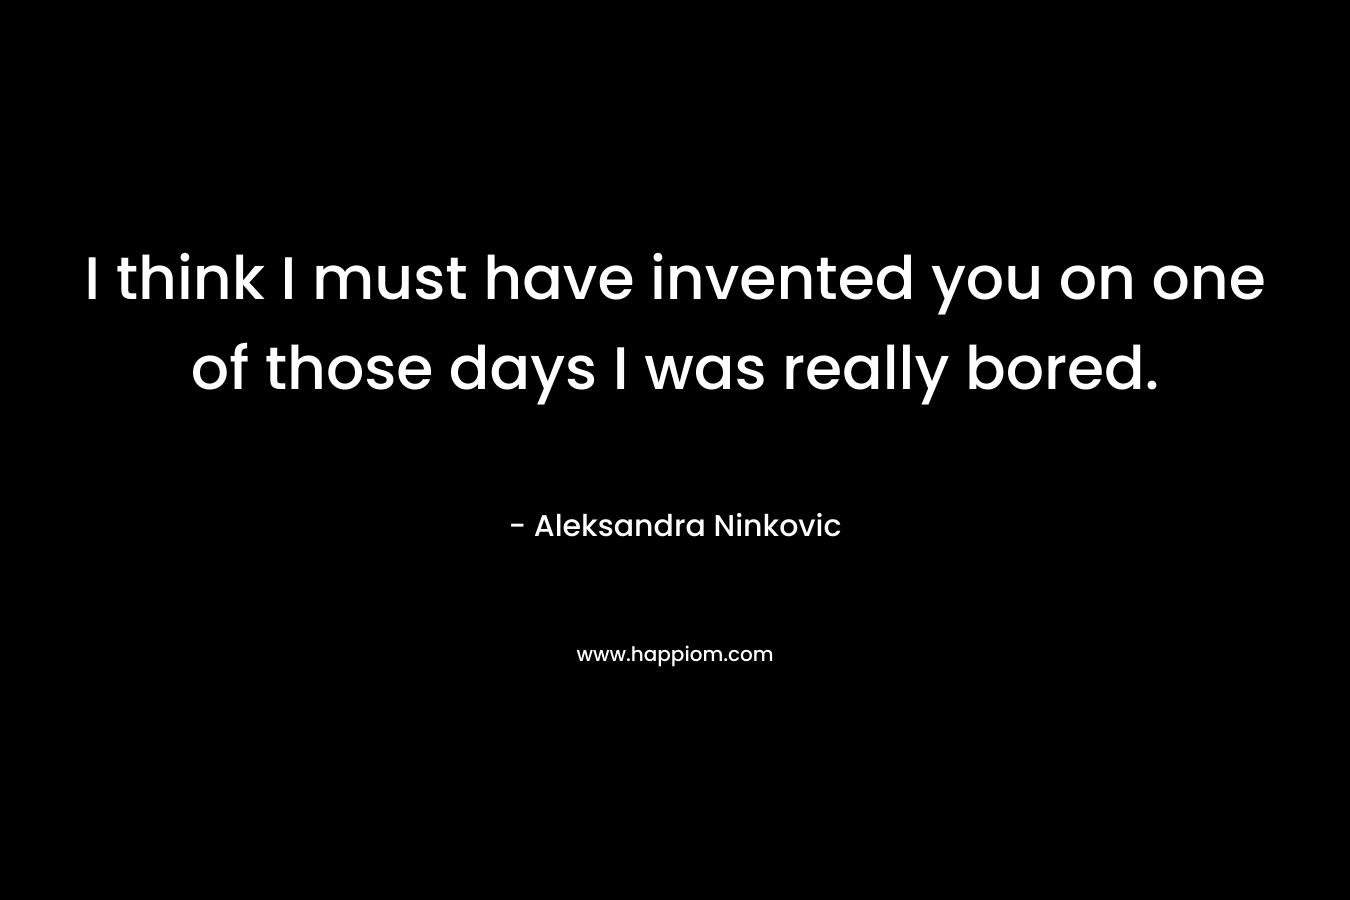 I think I must have invented you on one of those days I was really bored. – Aleksandra Ninkovic